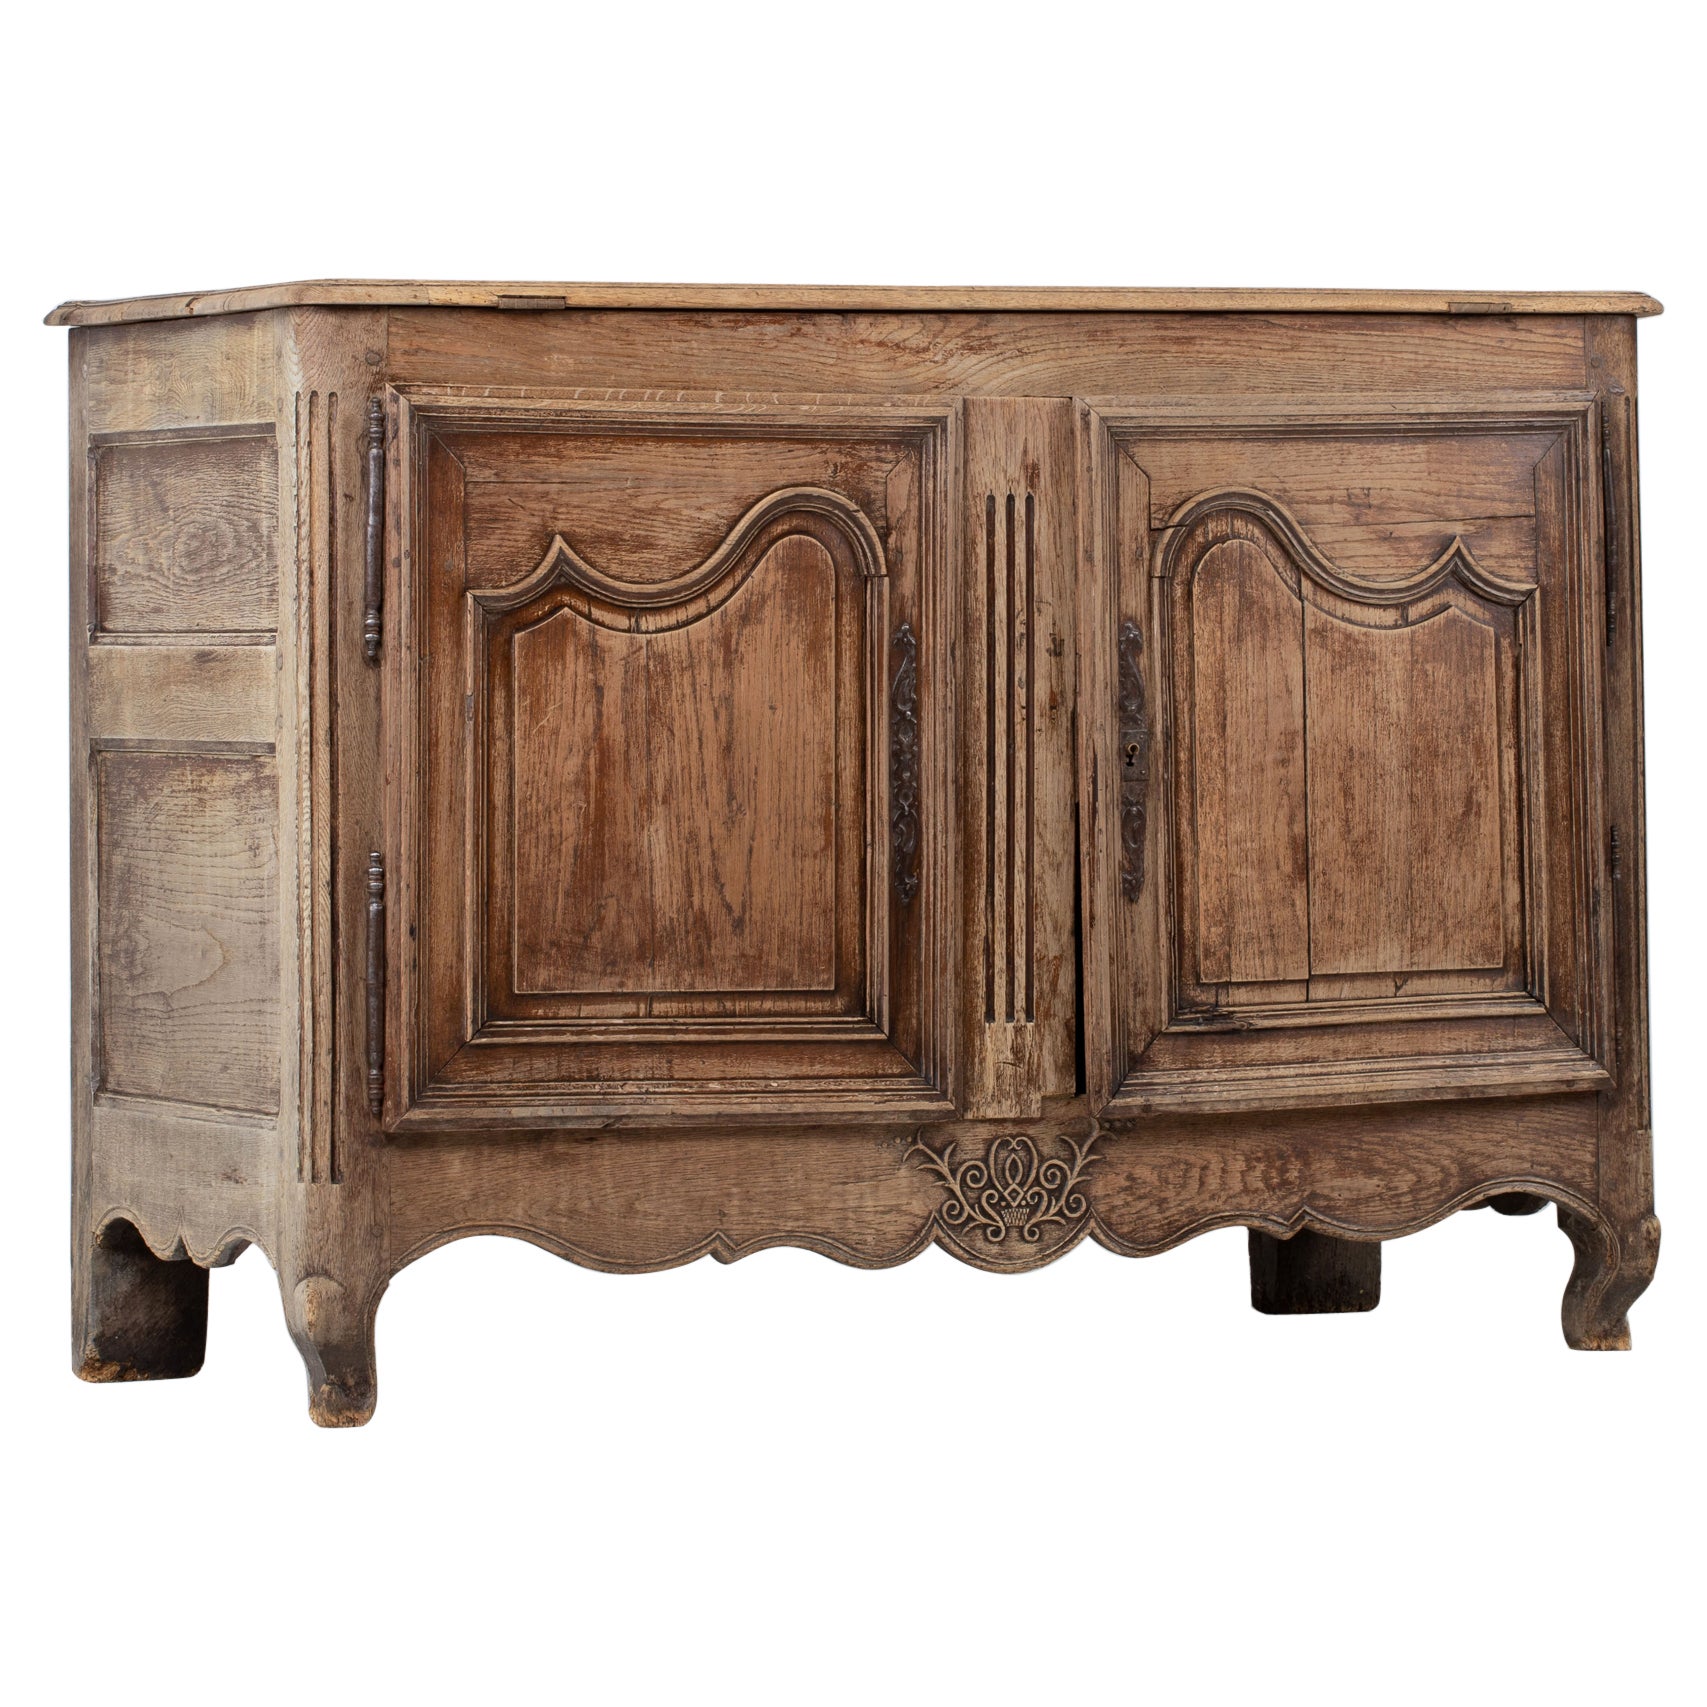 19th Century French Provencal Bleached Oak Buffet Cabinet For Sale